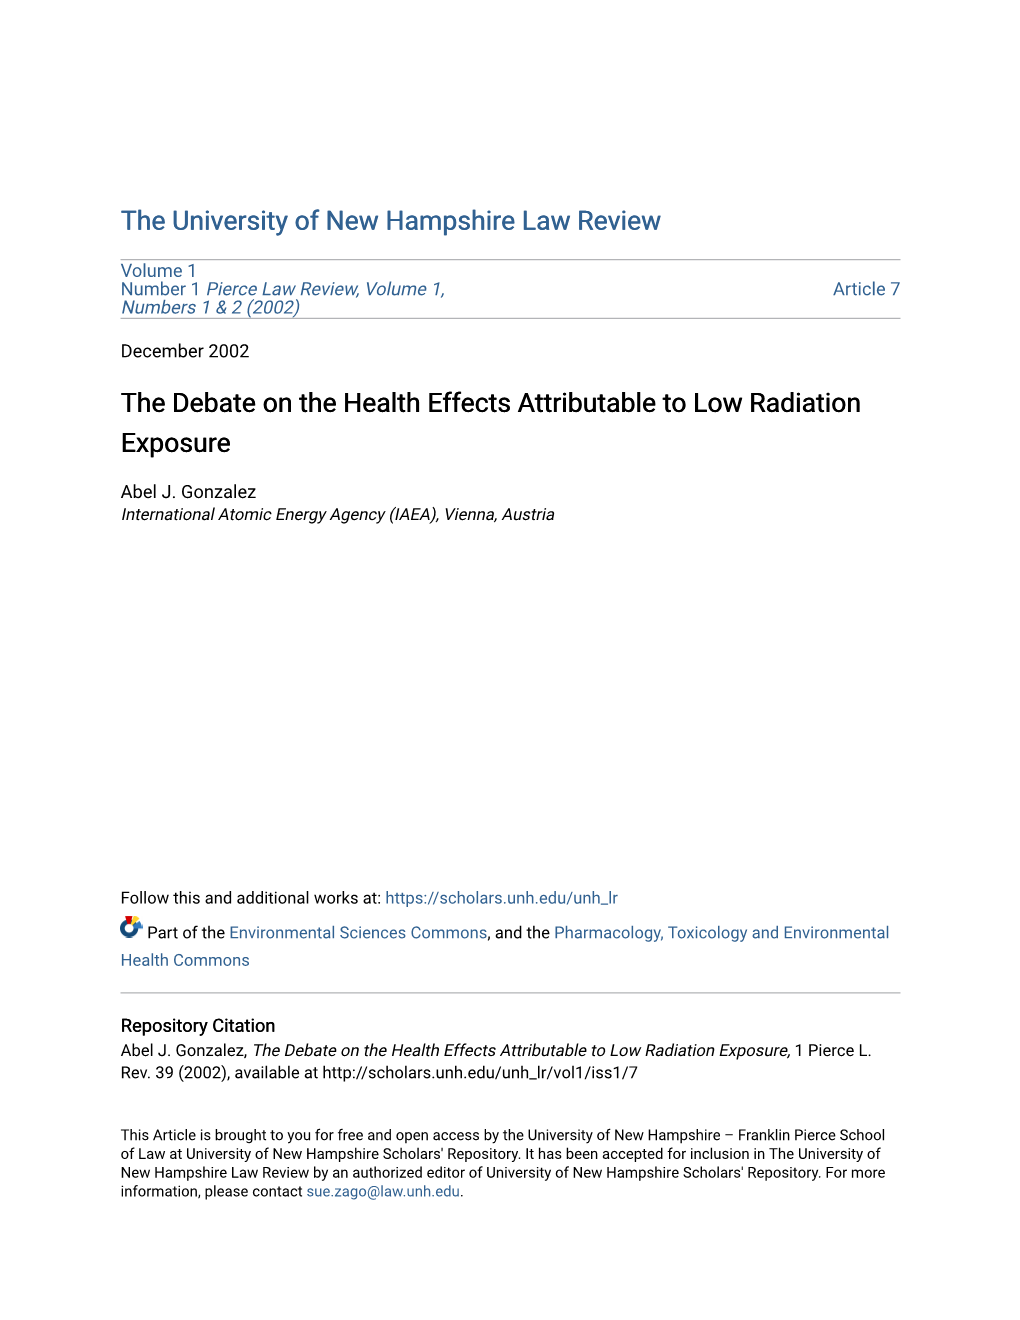 The Debate on the Health Effects Attributable to Low Radiation Exposure